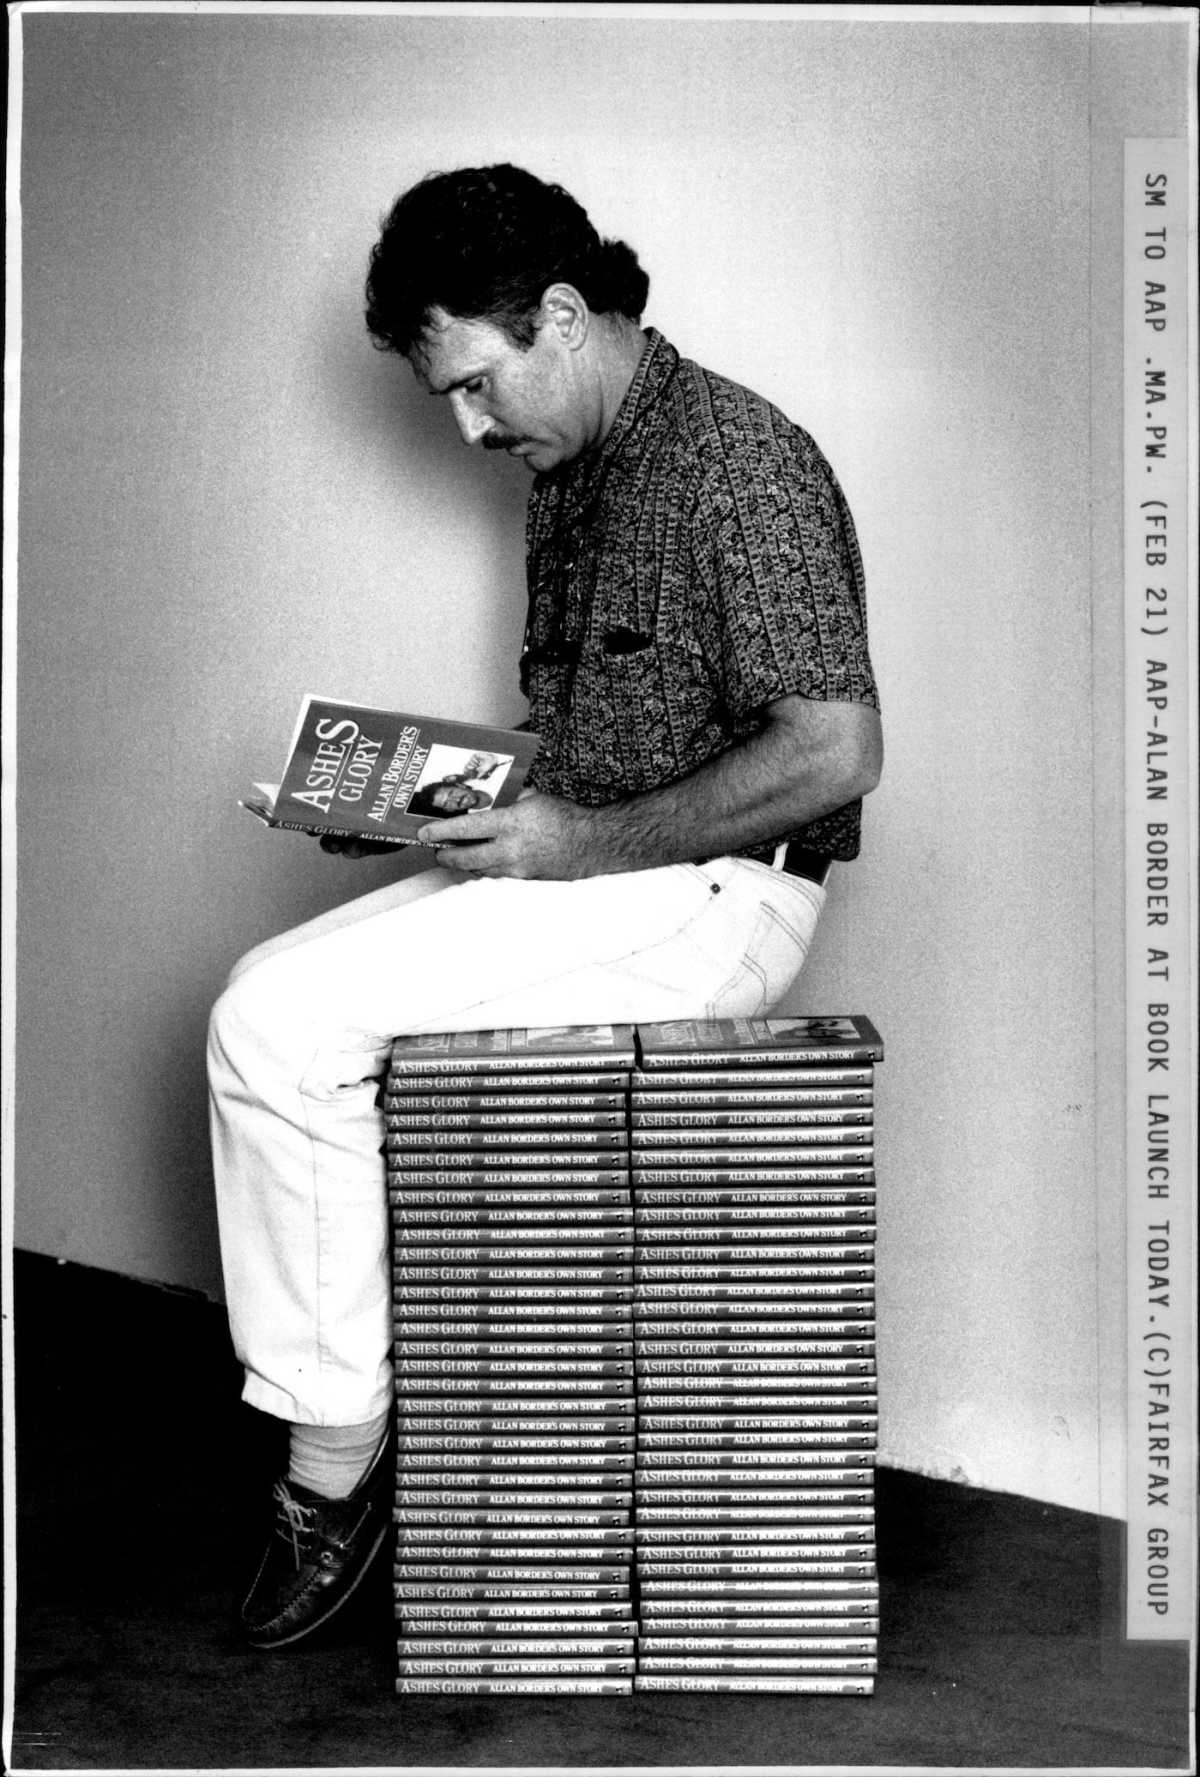 Allan Border reads his own book at his book launch, Sydney, February 21, 1990